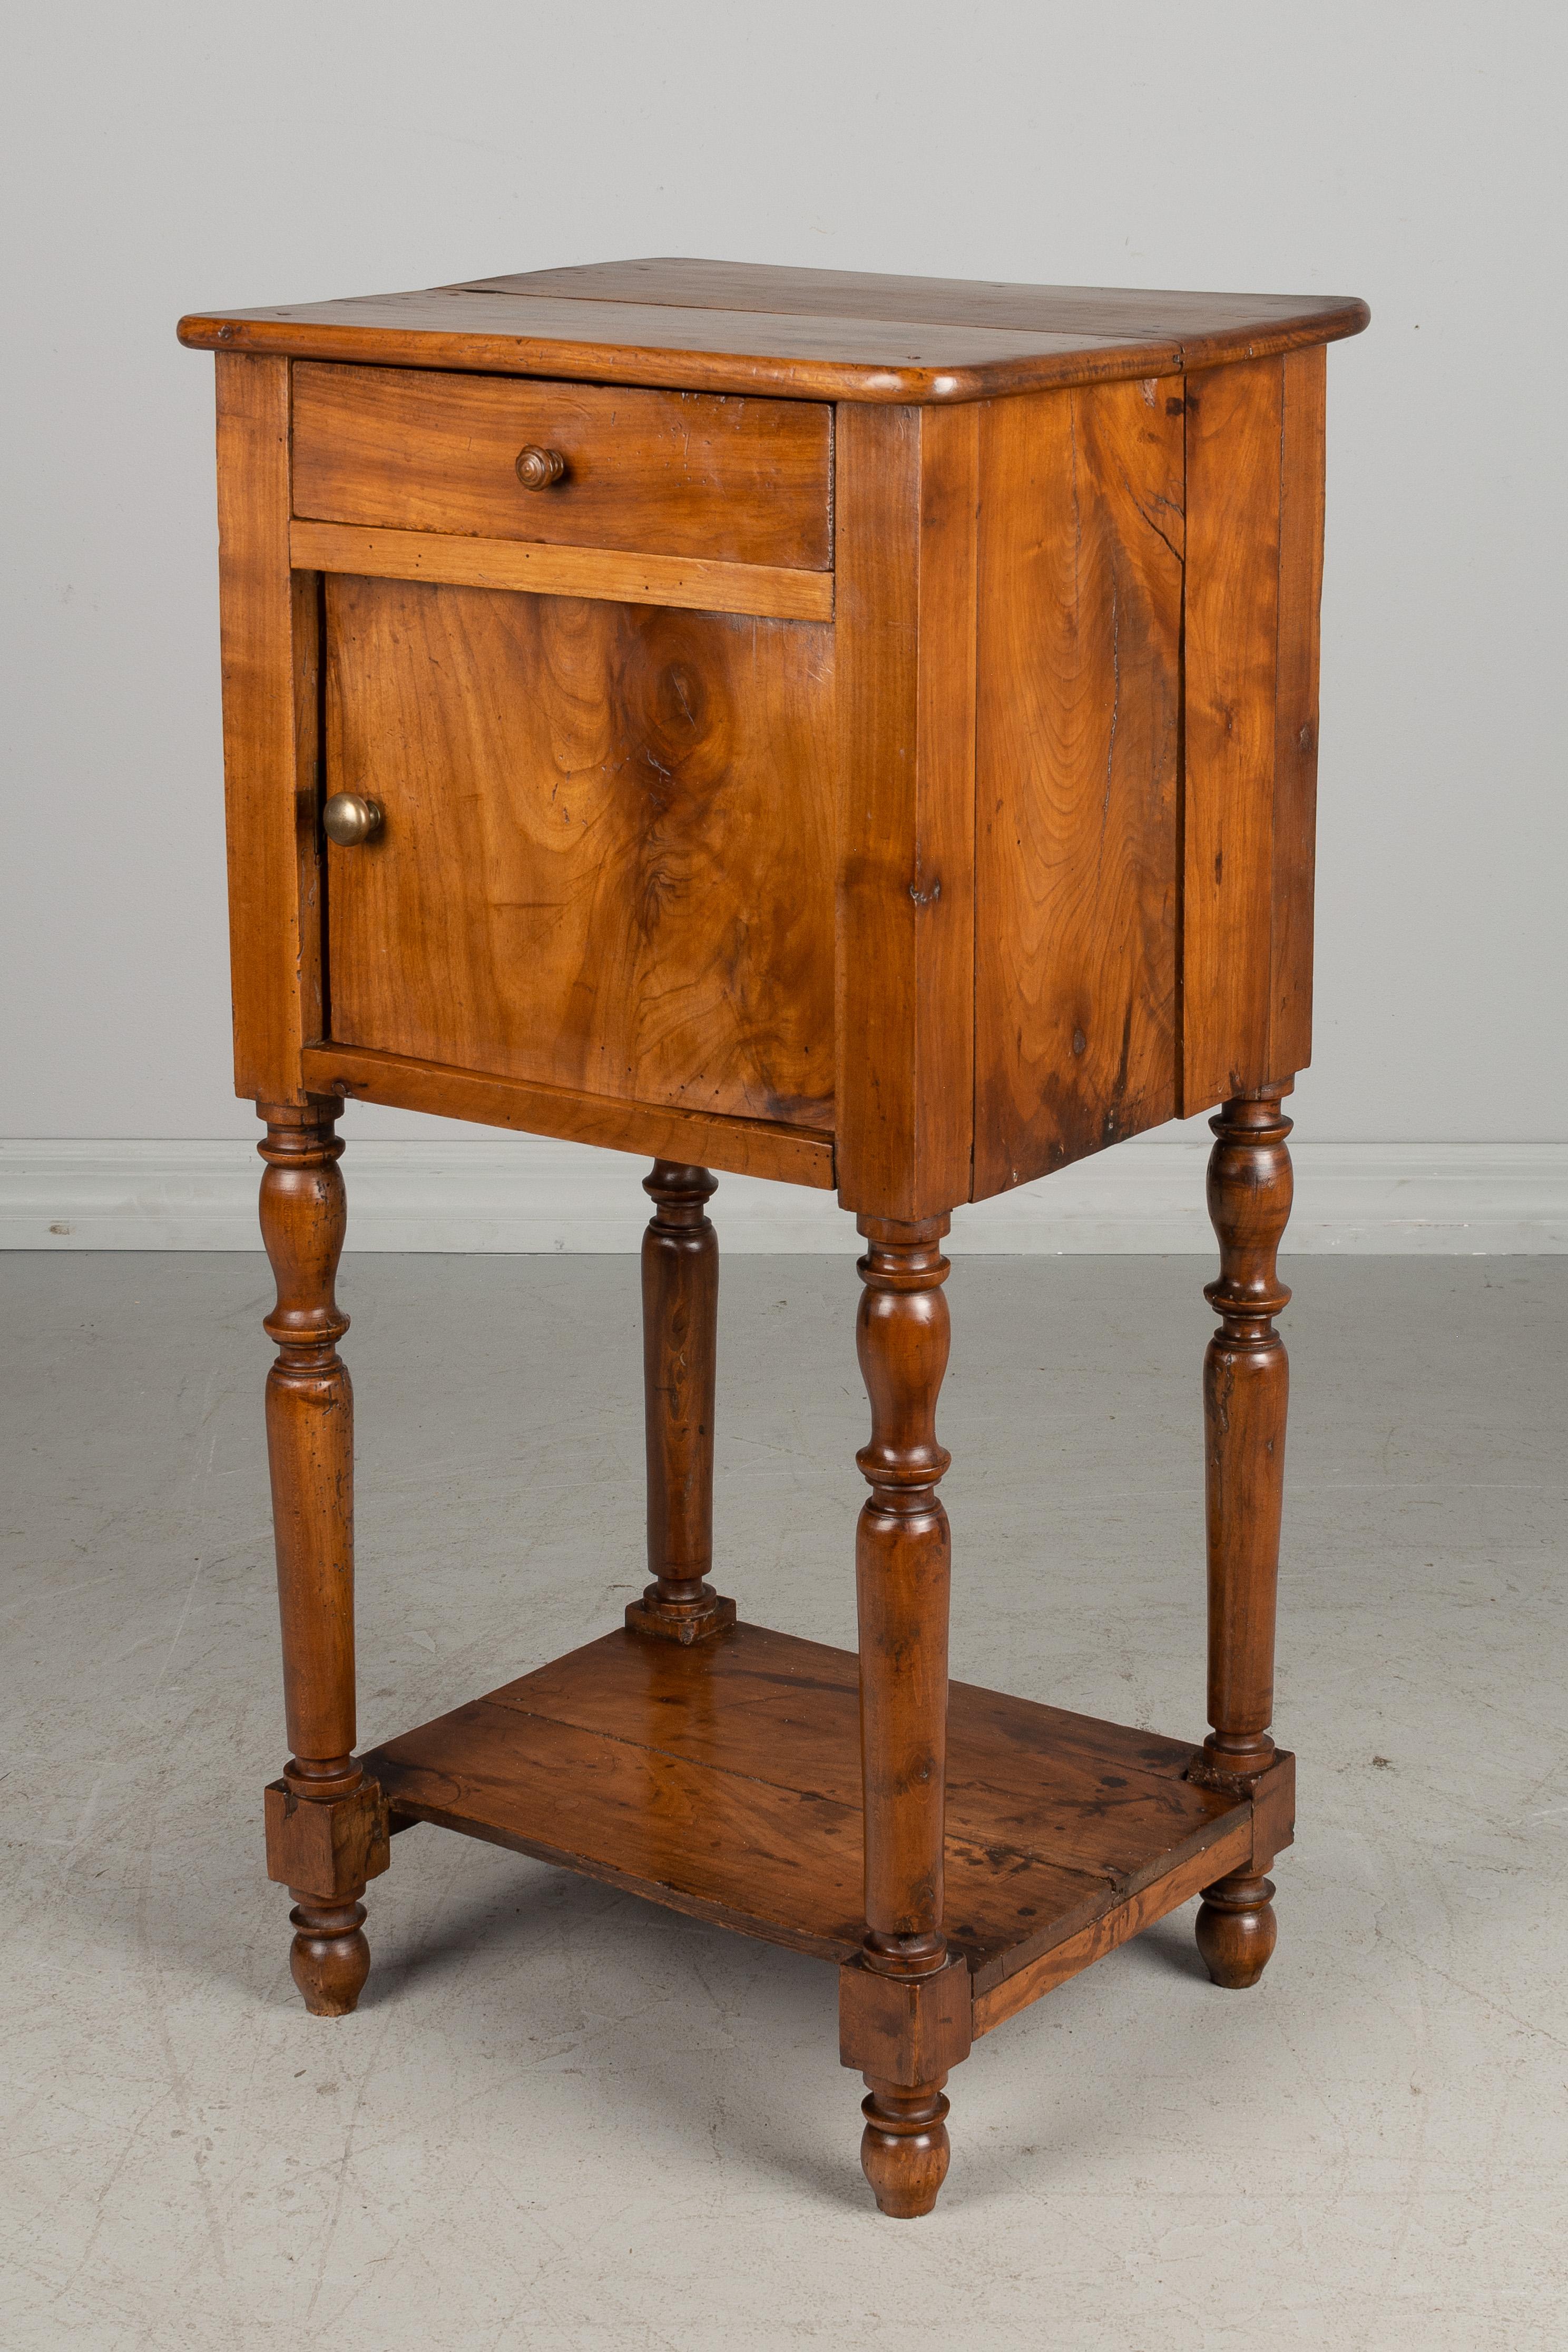 An early 20th century Country French tall side table or stand made of solid cherry with turned legs and lower shelf. Shallow drawer above a cabinet door opening to a fabric lined interior. Good restored condition.